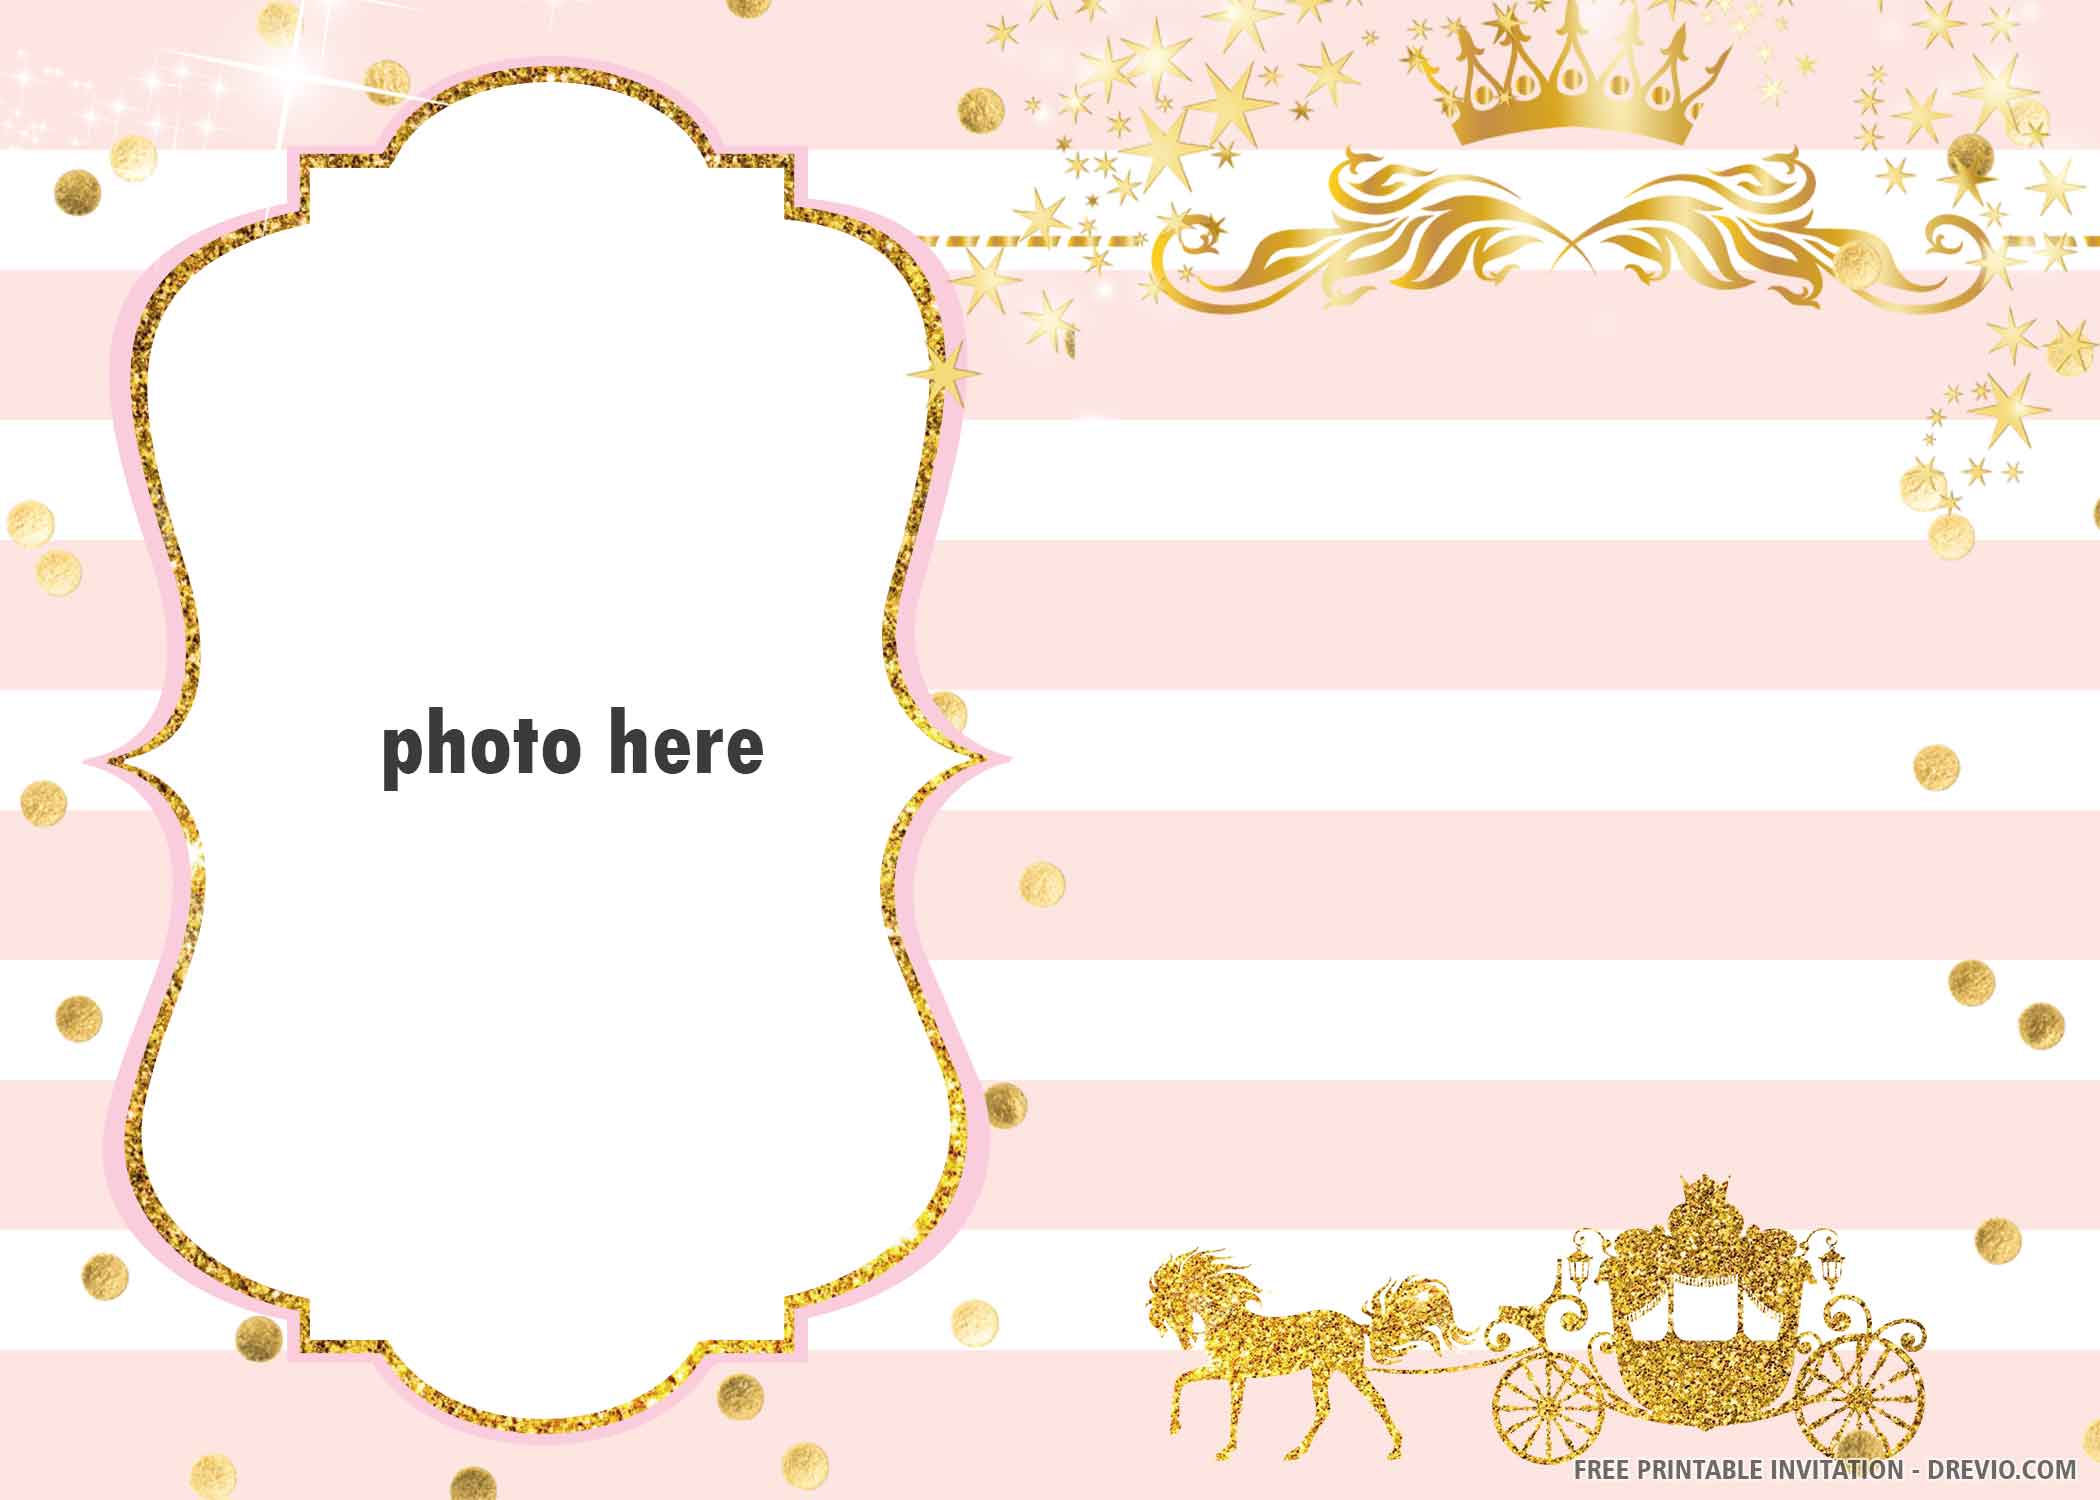 free-printable-golden-carriage-invitation-template-download-hundreds-free-printable-birthday